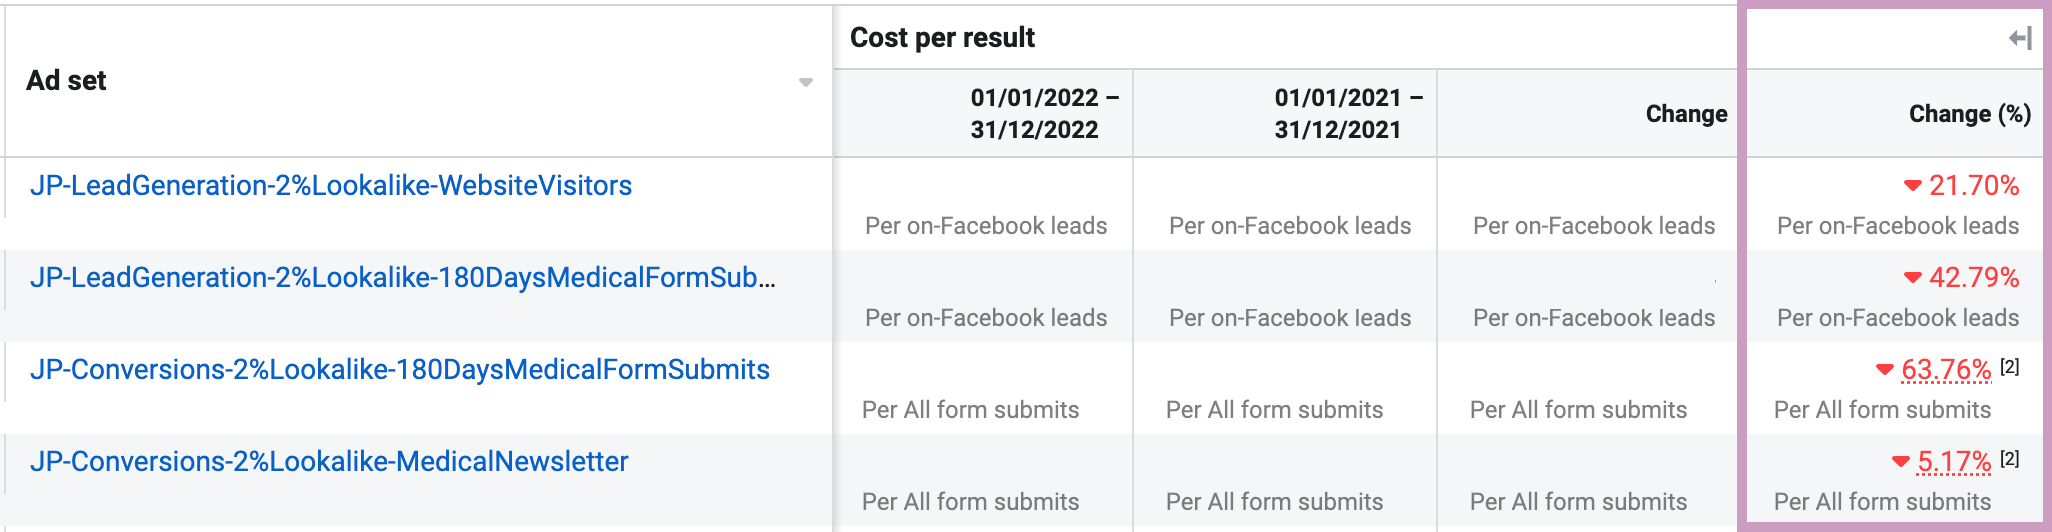 Cost per on-Facebook and all form submit leads generated through B2B Facebook ads